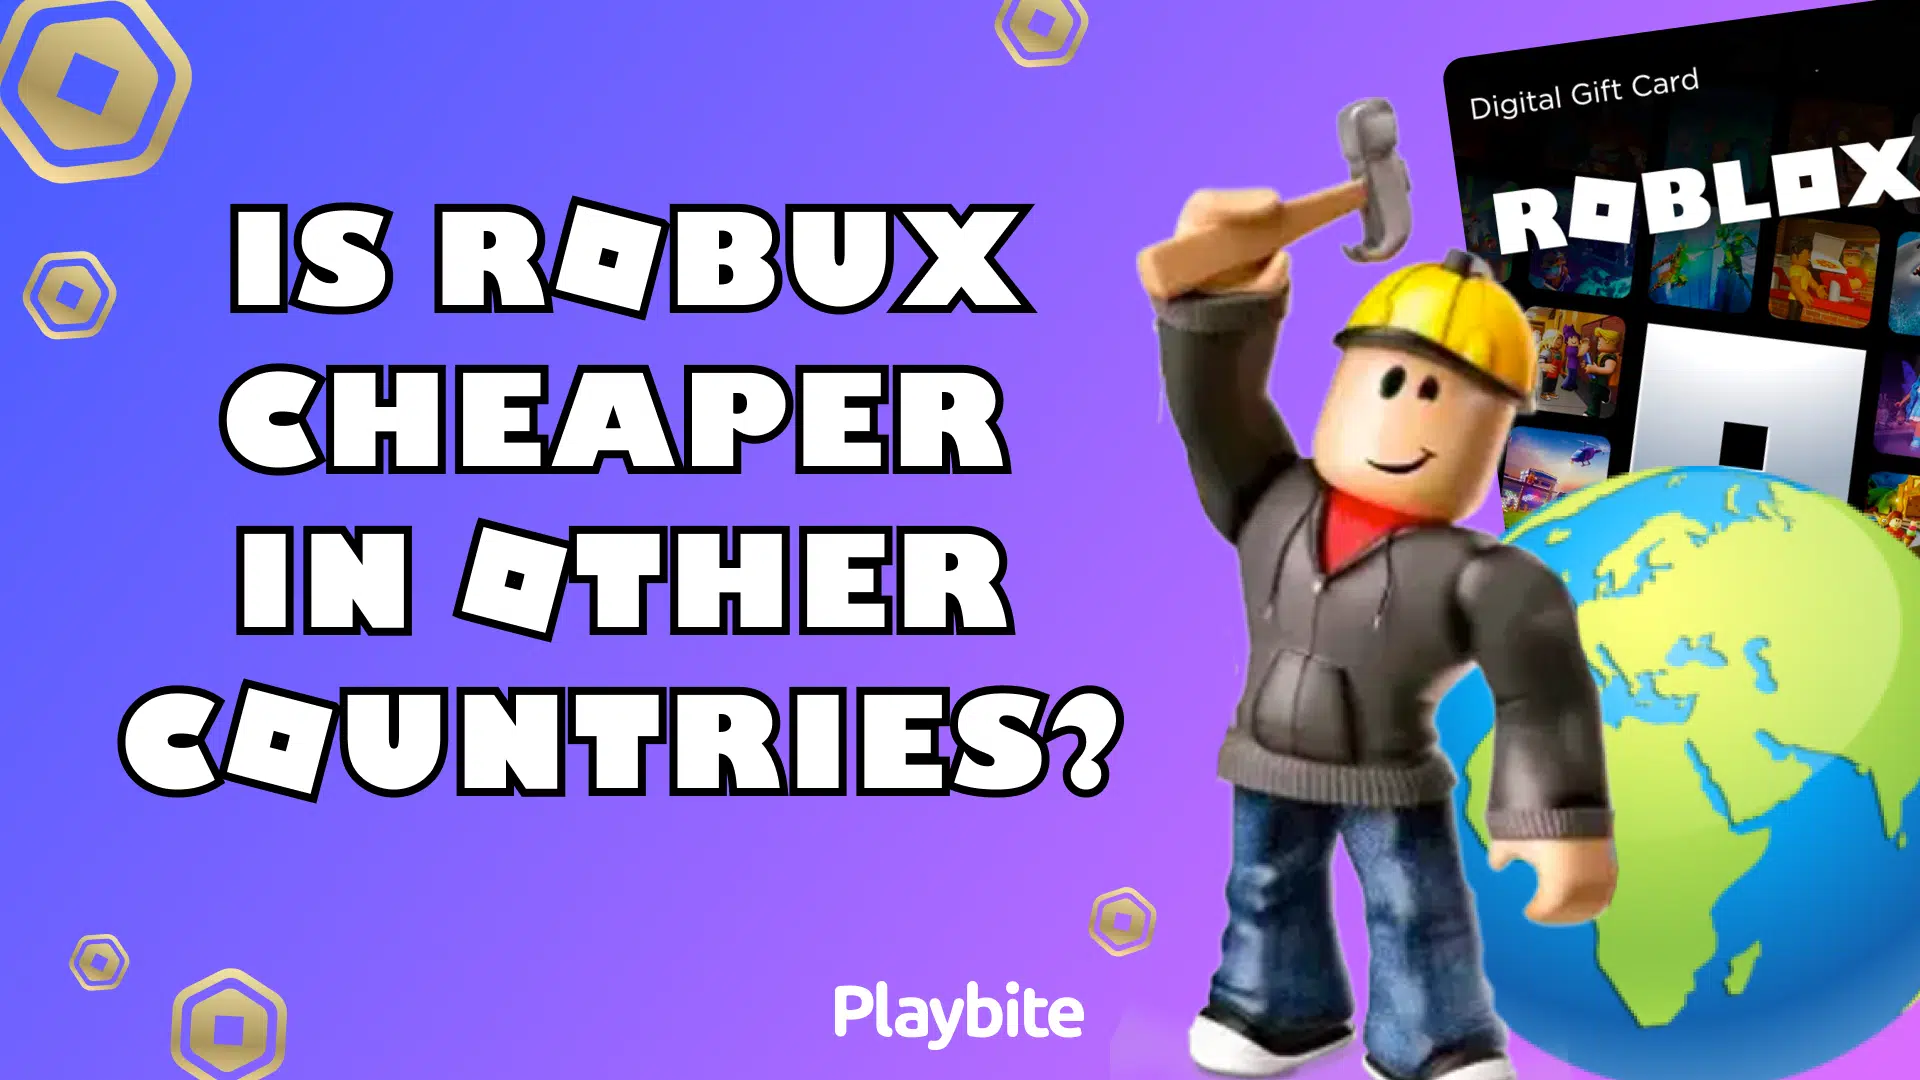 Apps That Give You Free Robux - Playbite